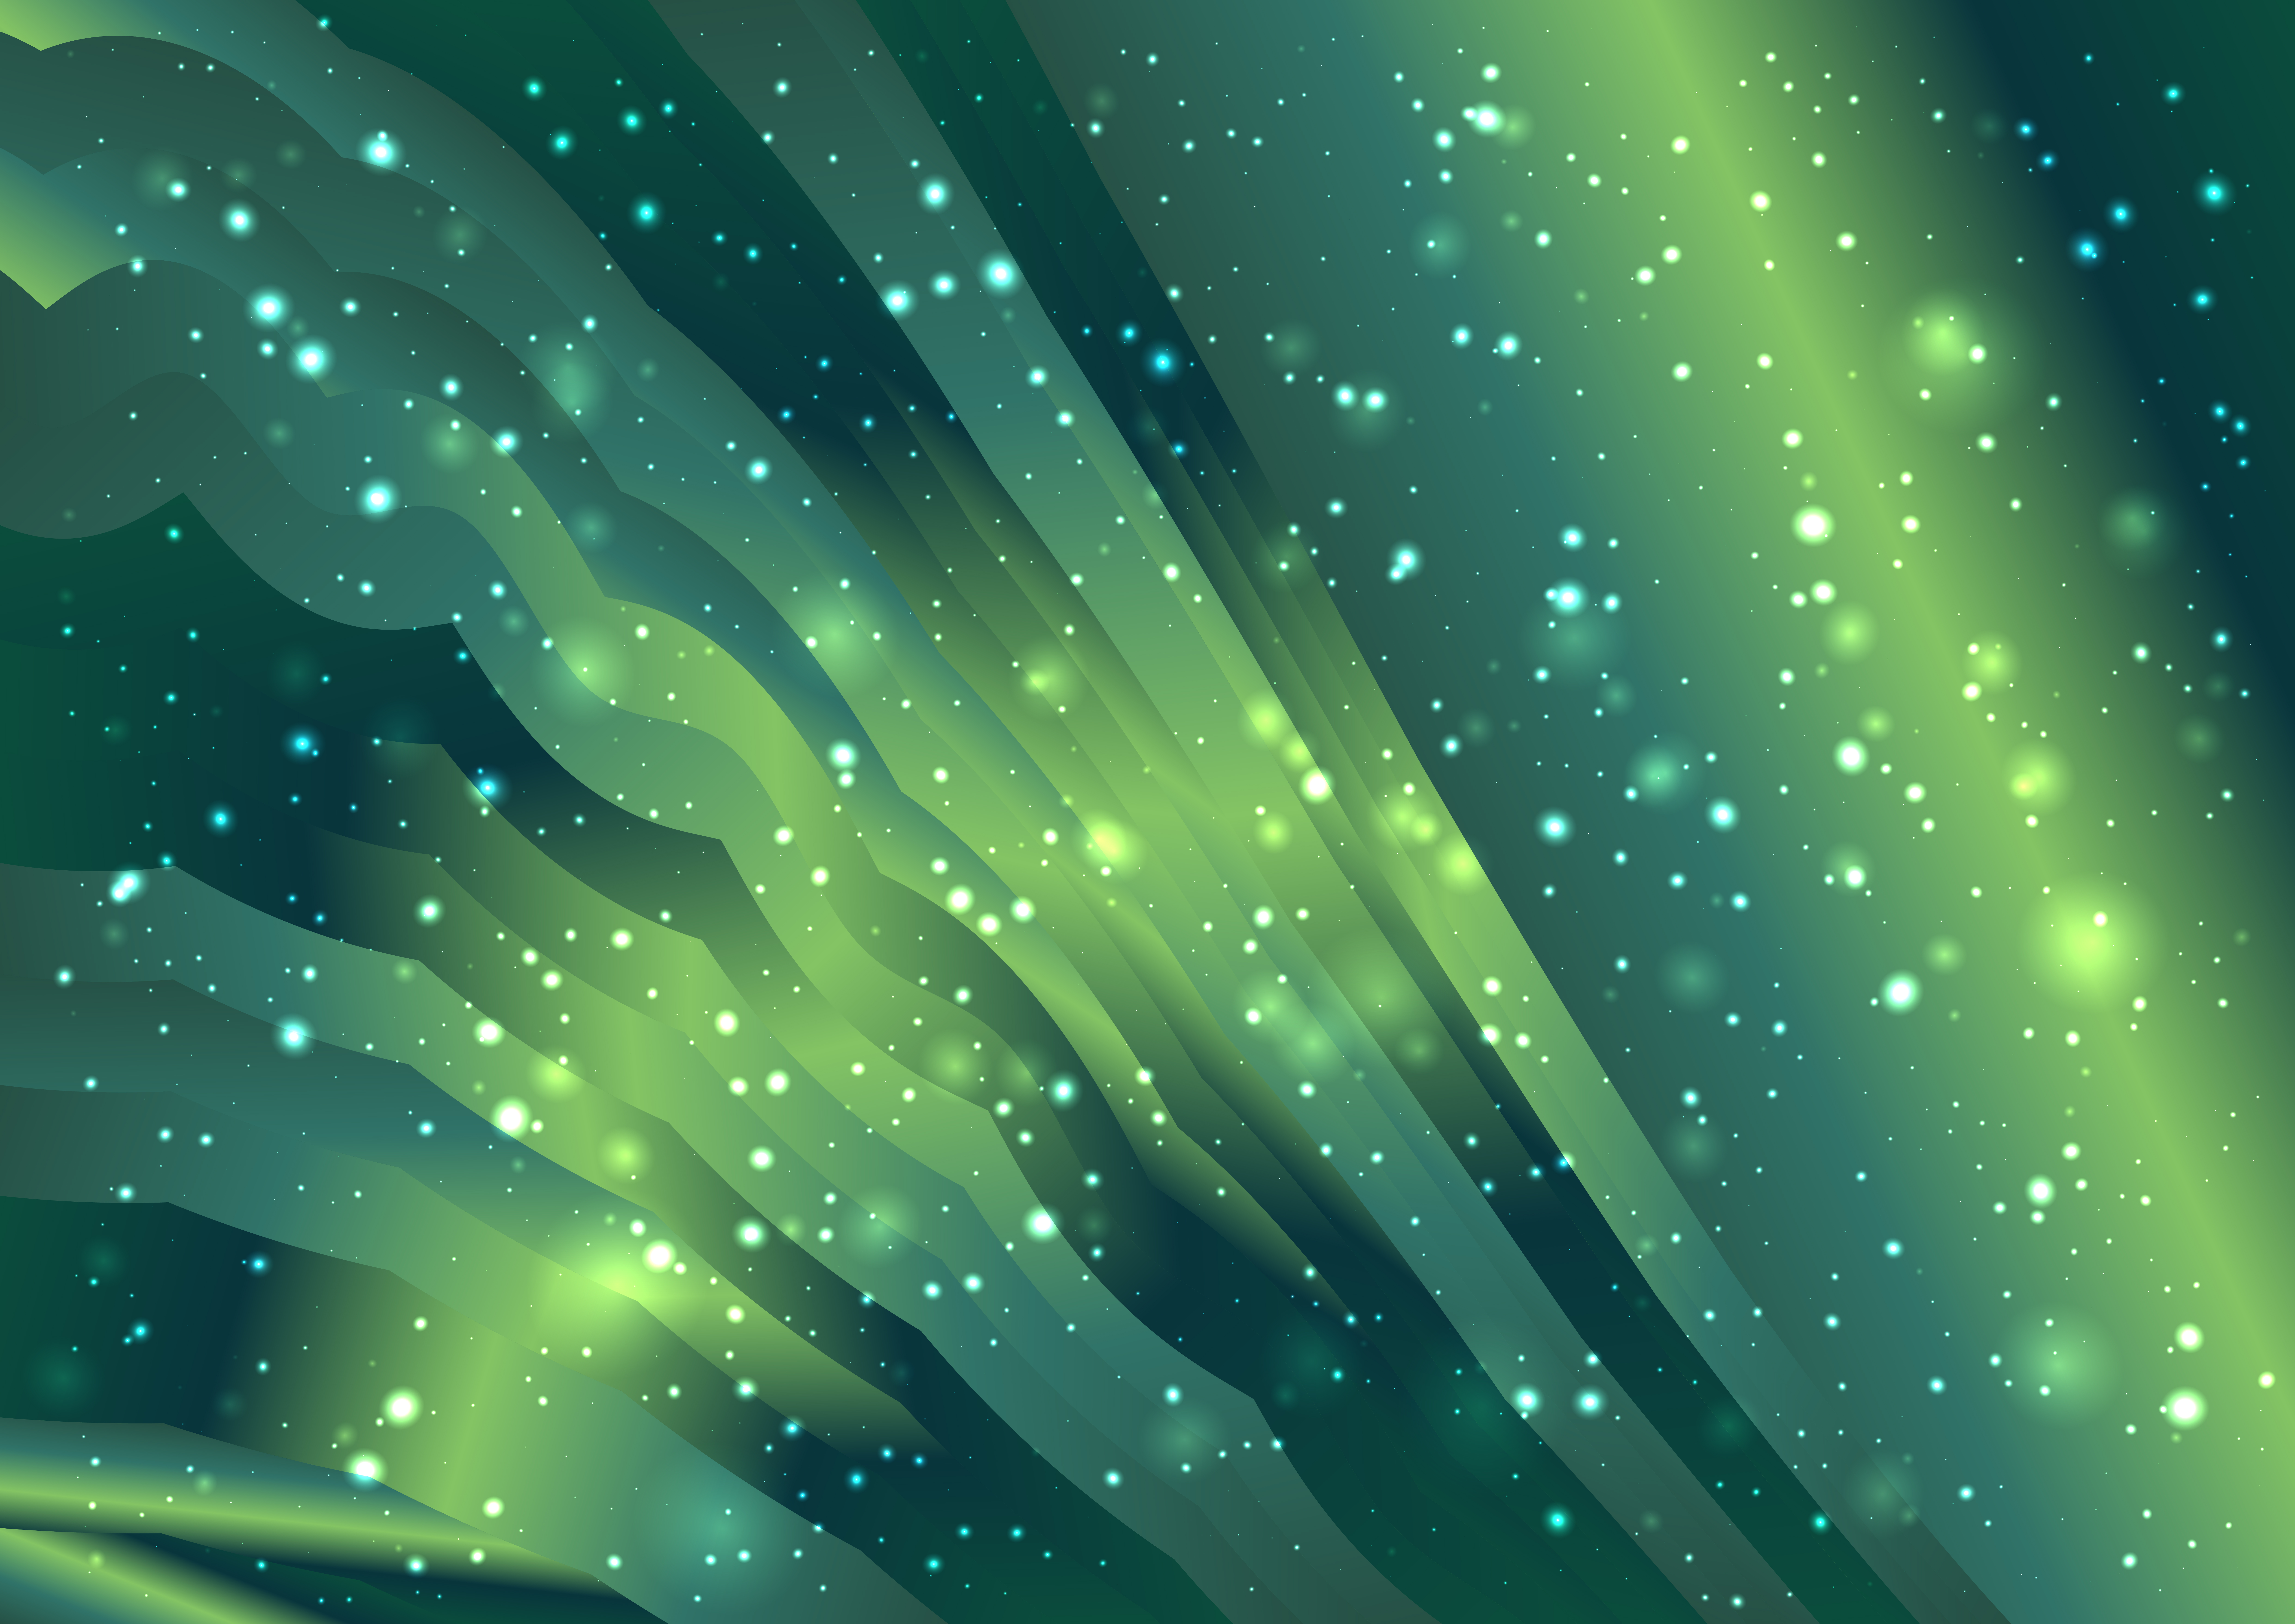 Free Blue and Green Gradient Background Vector